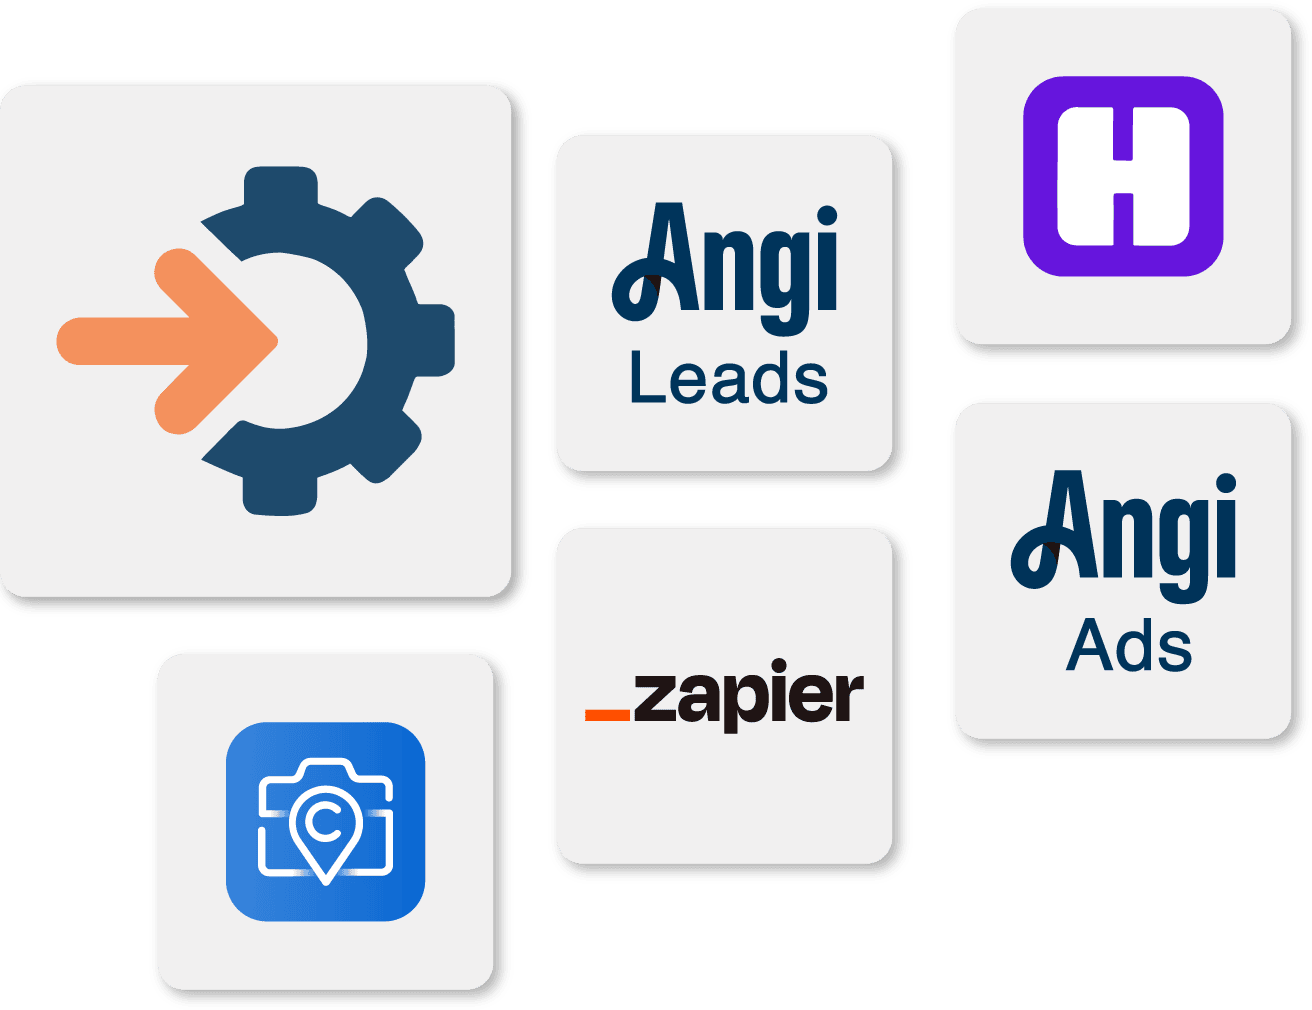 AccuLynx AppConnections includes Angi Leads, Hatch, CompanyCam, Zapier, and Angi Ads